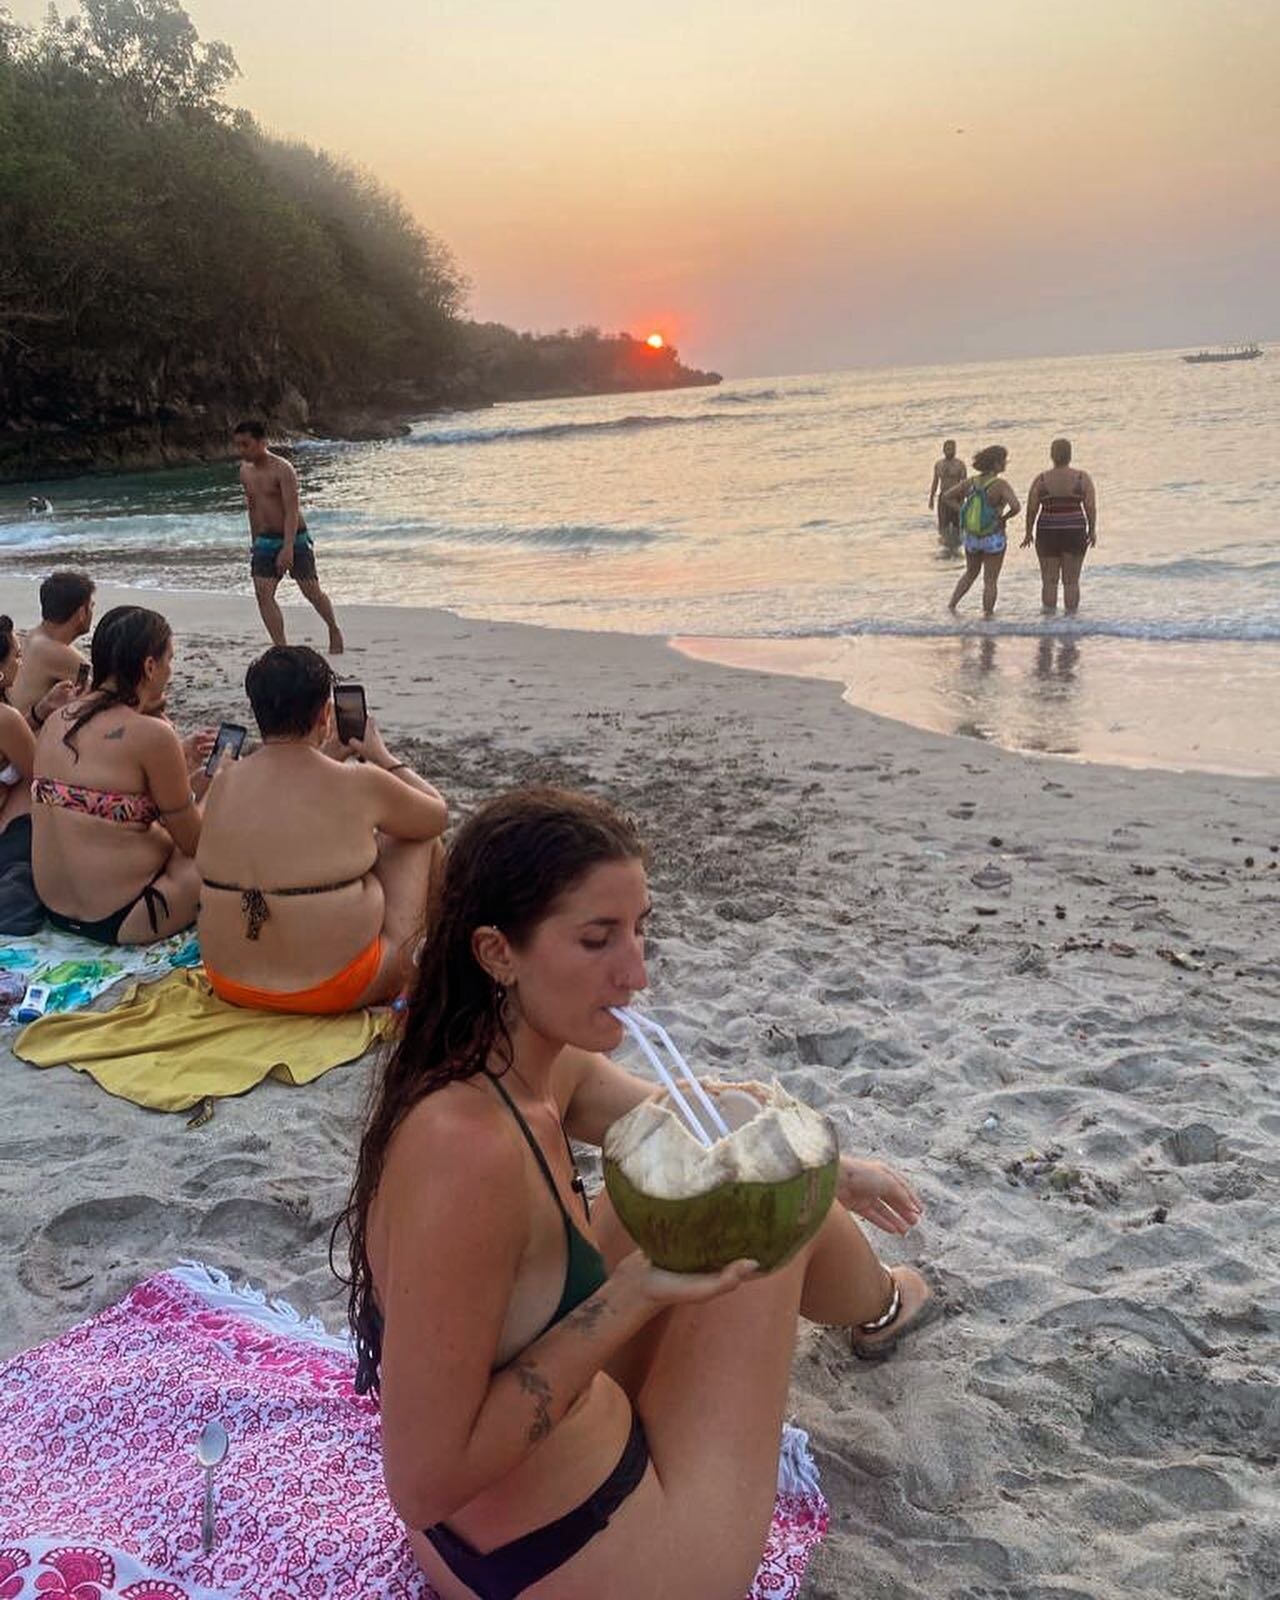 I think I need another straw 
&bull;
&bull;
&bull;
We spent four days eating nothing but coconuts and grilled jacketfish, driving around the entire island of Nusa Penida, and swimming in the glow of red sunsets. 

#islandLife